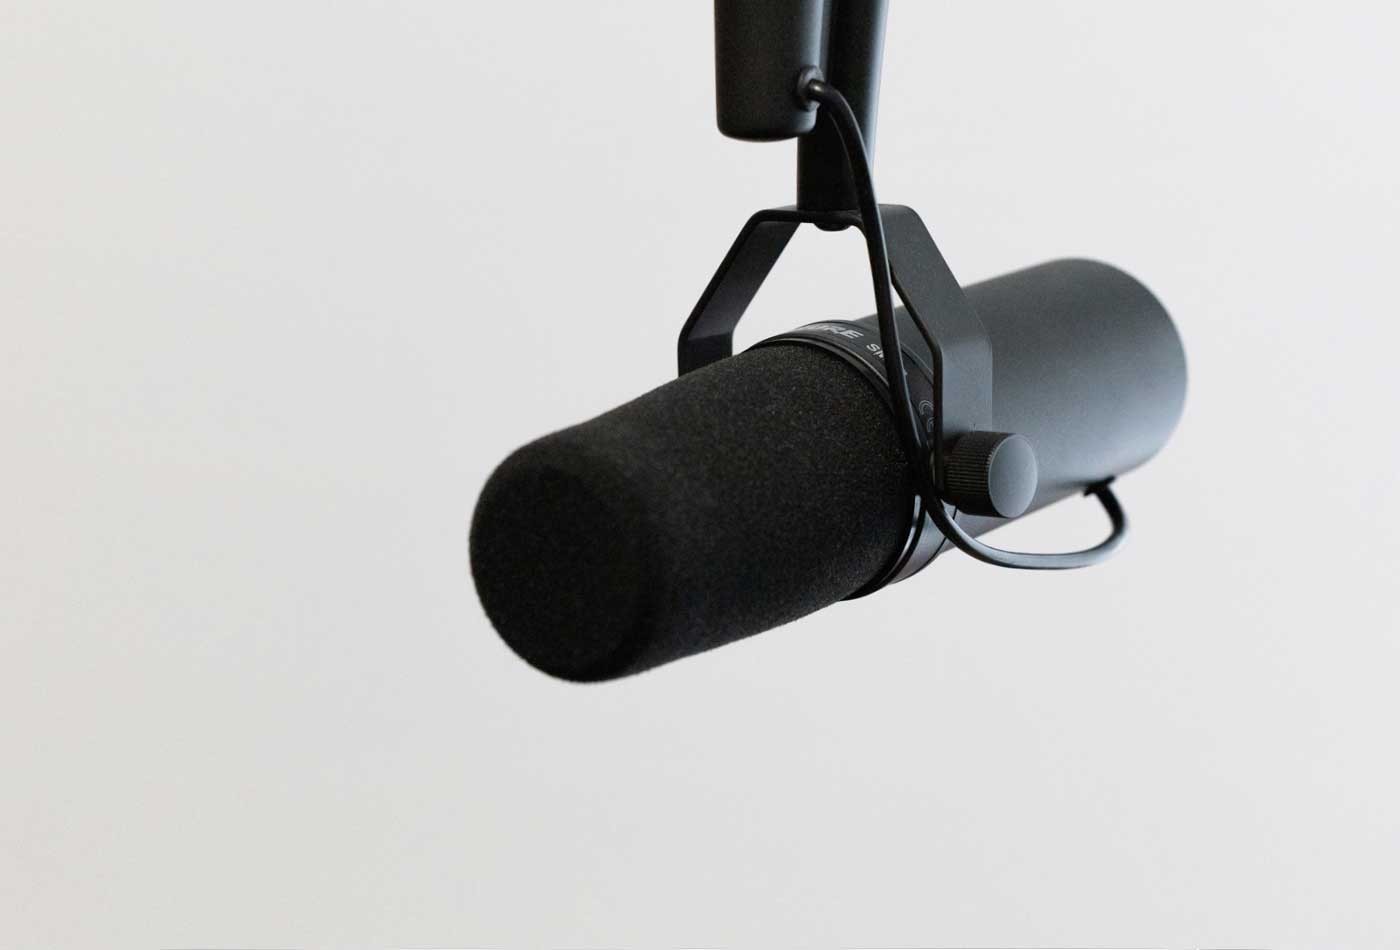 Corporate podcasts for companies - Shows a microphone